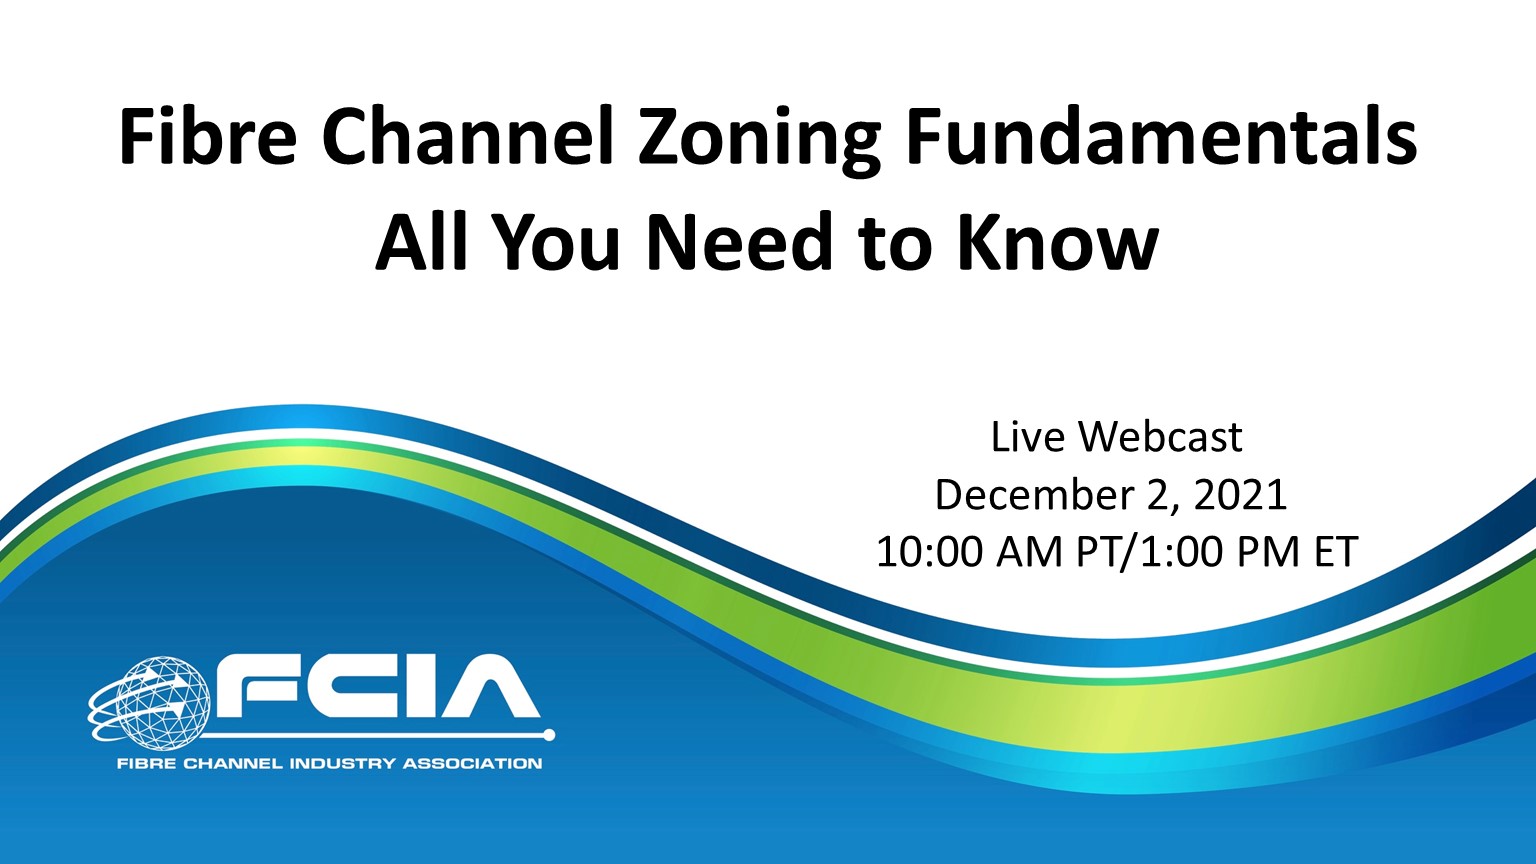 Fibre Channel Zoning Fundamentals – All You Need to Know